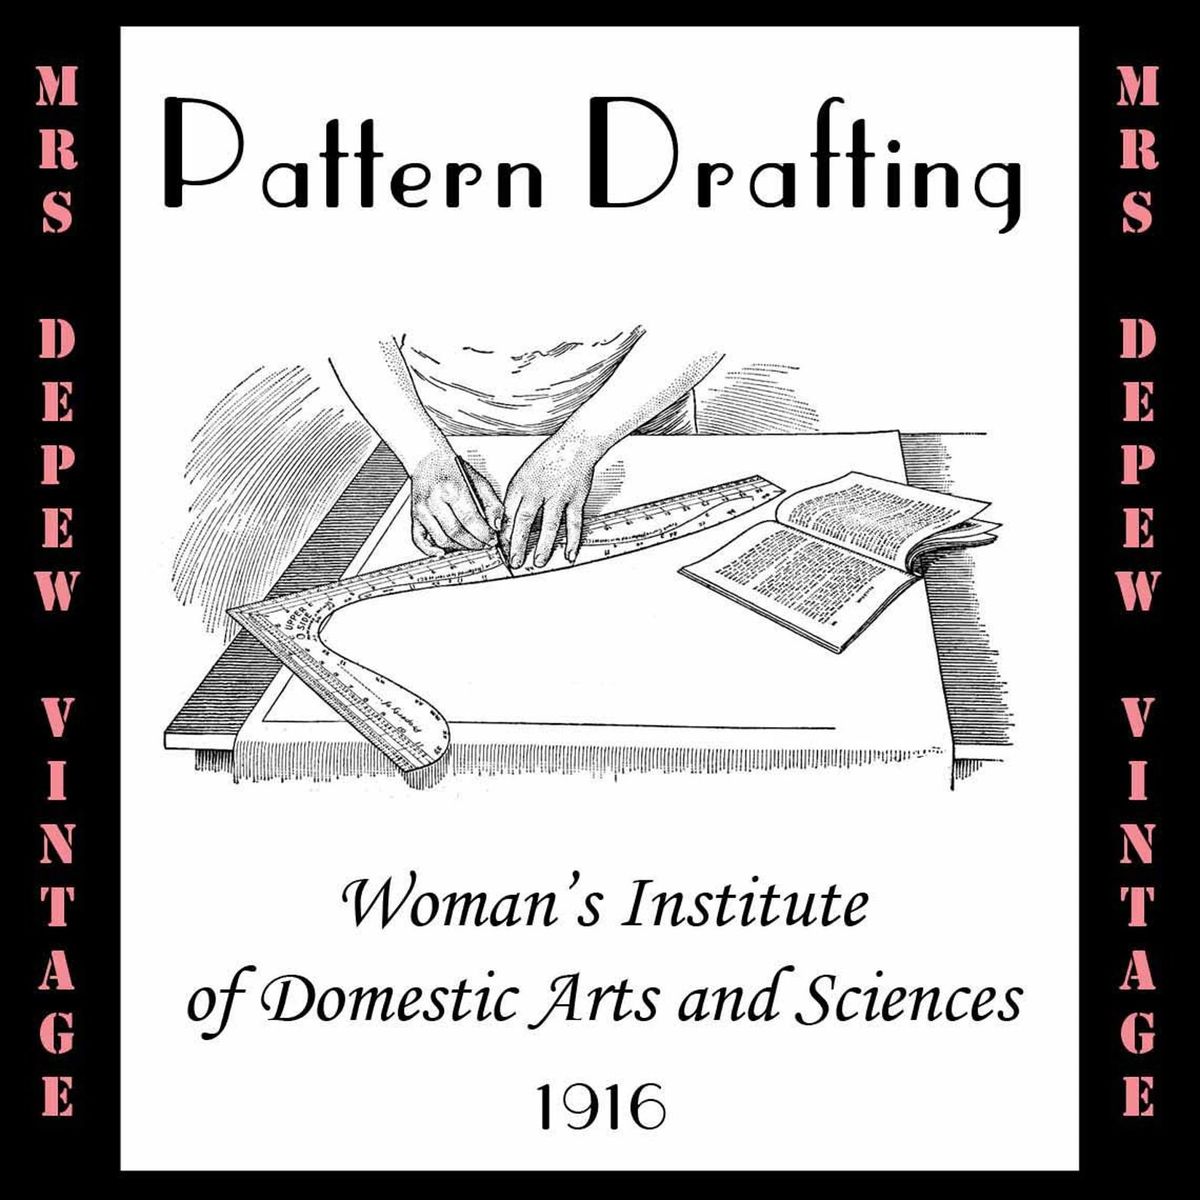 ENGLISH E-book FULL-COURSE for Bra Pattern Drafting by